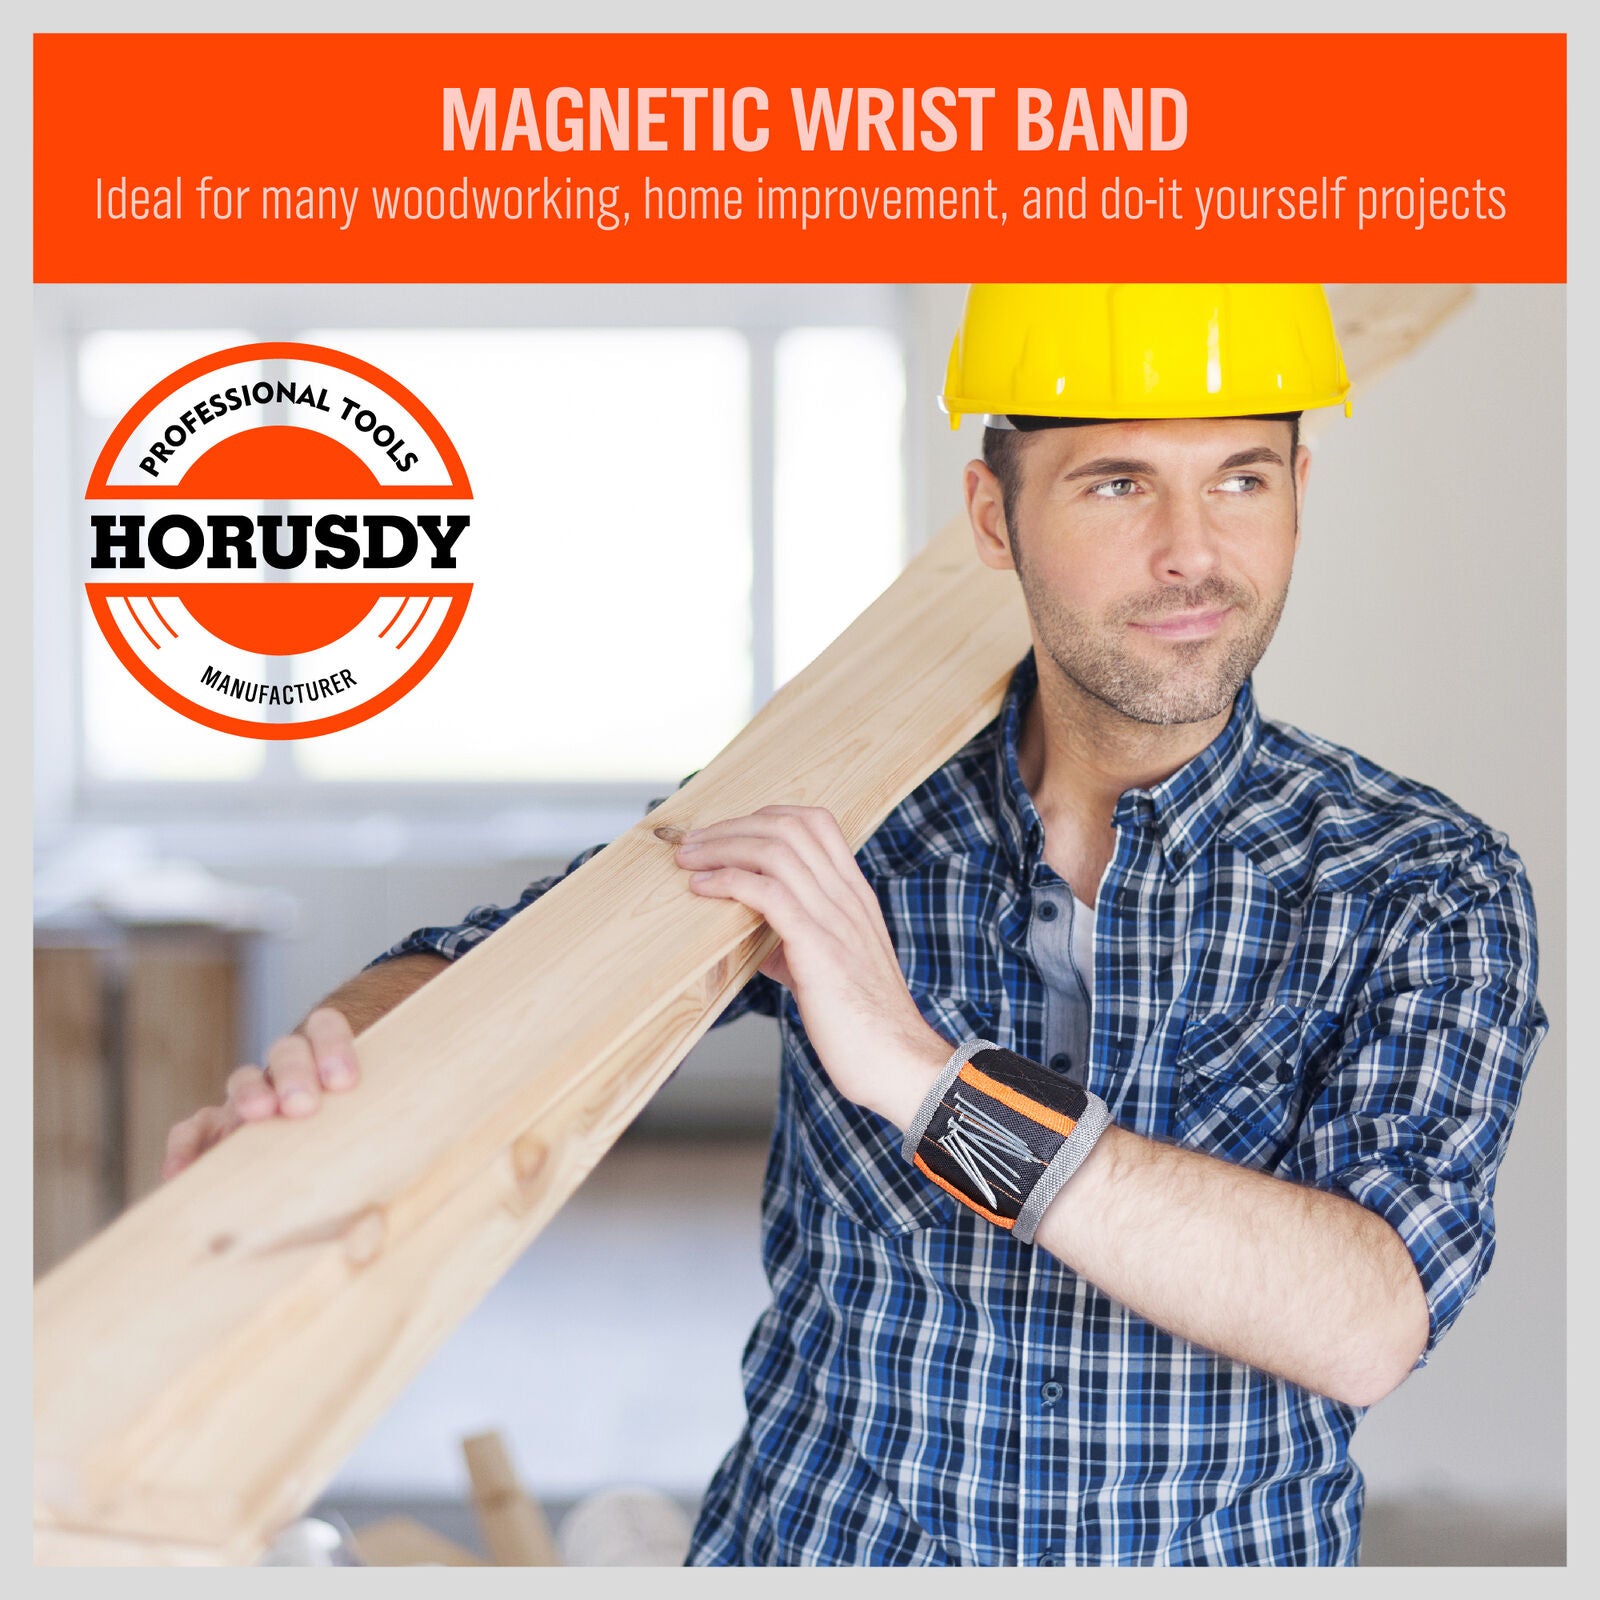 Adjustable magnetic wristband with strong magnets for securing screws, bolts, and nails.